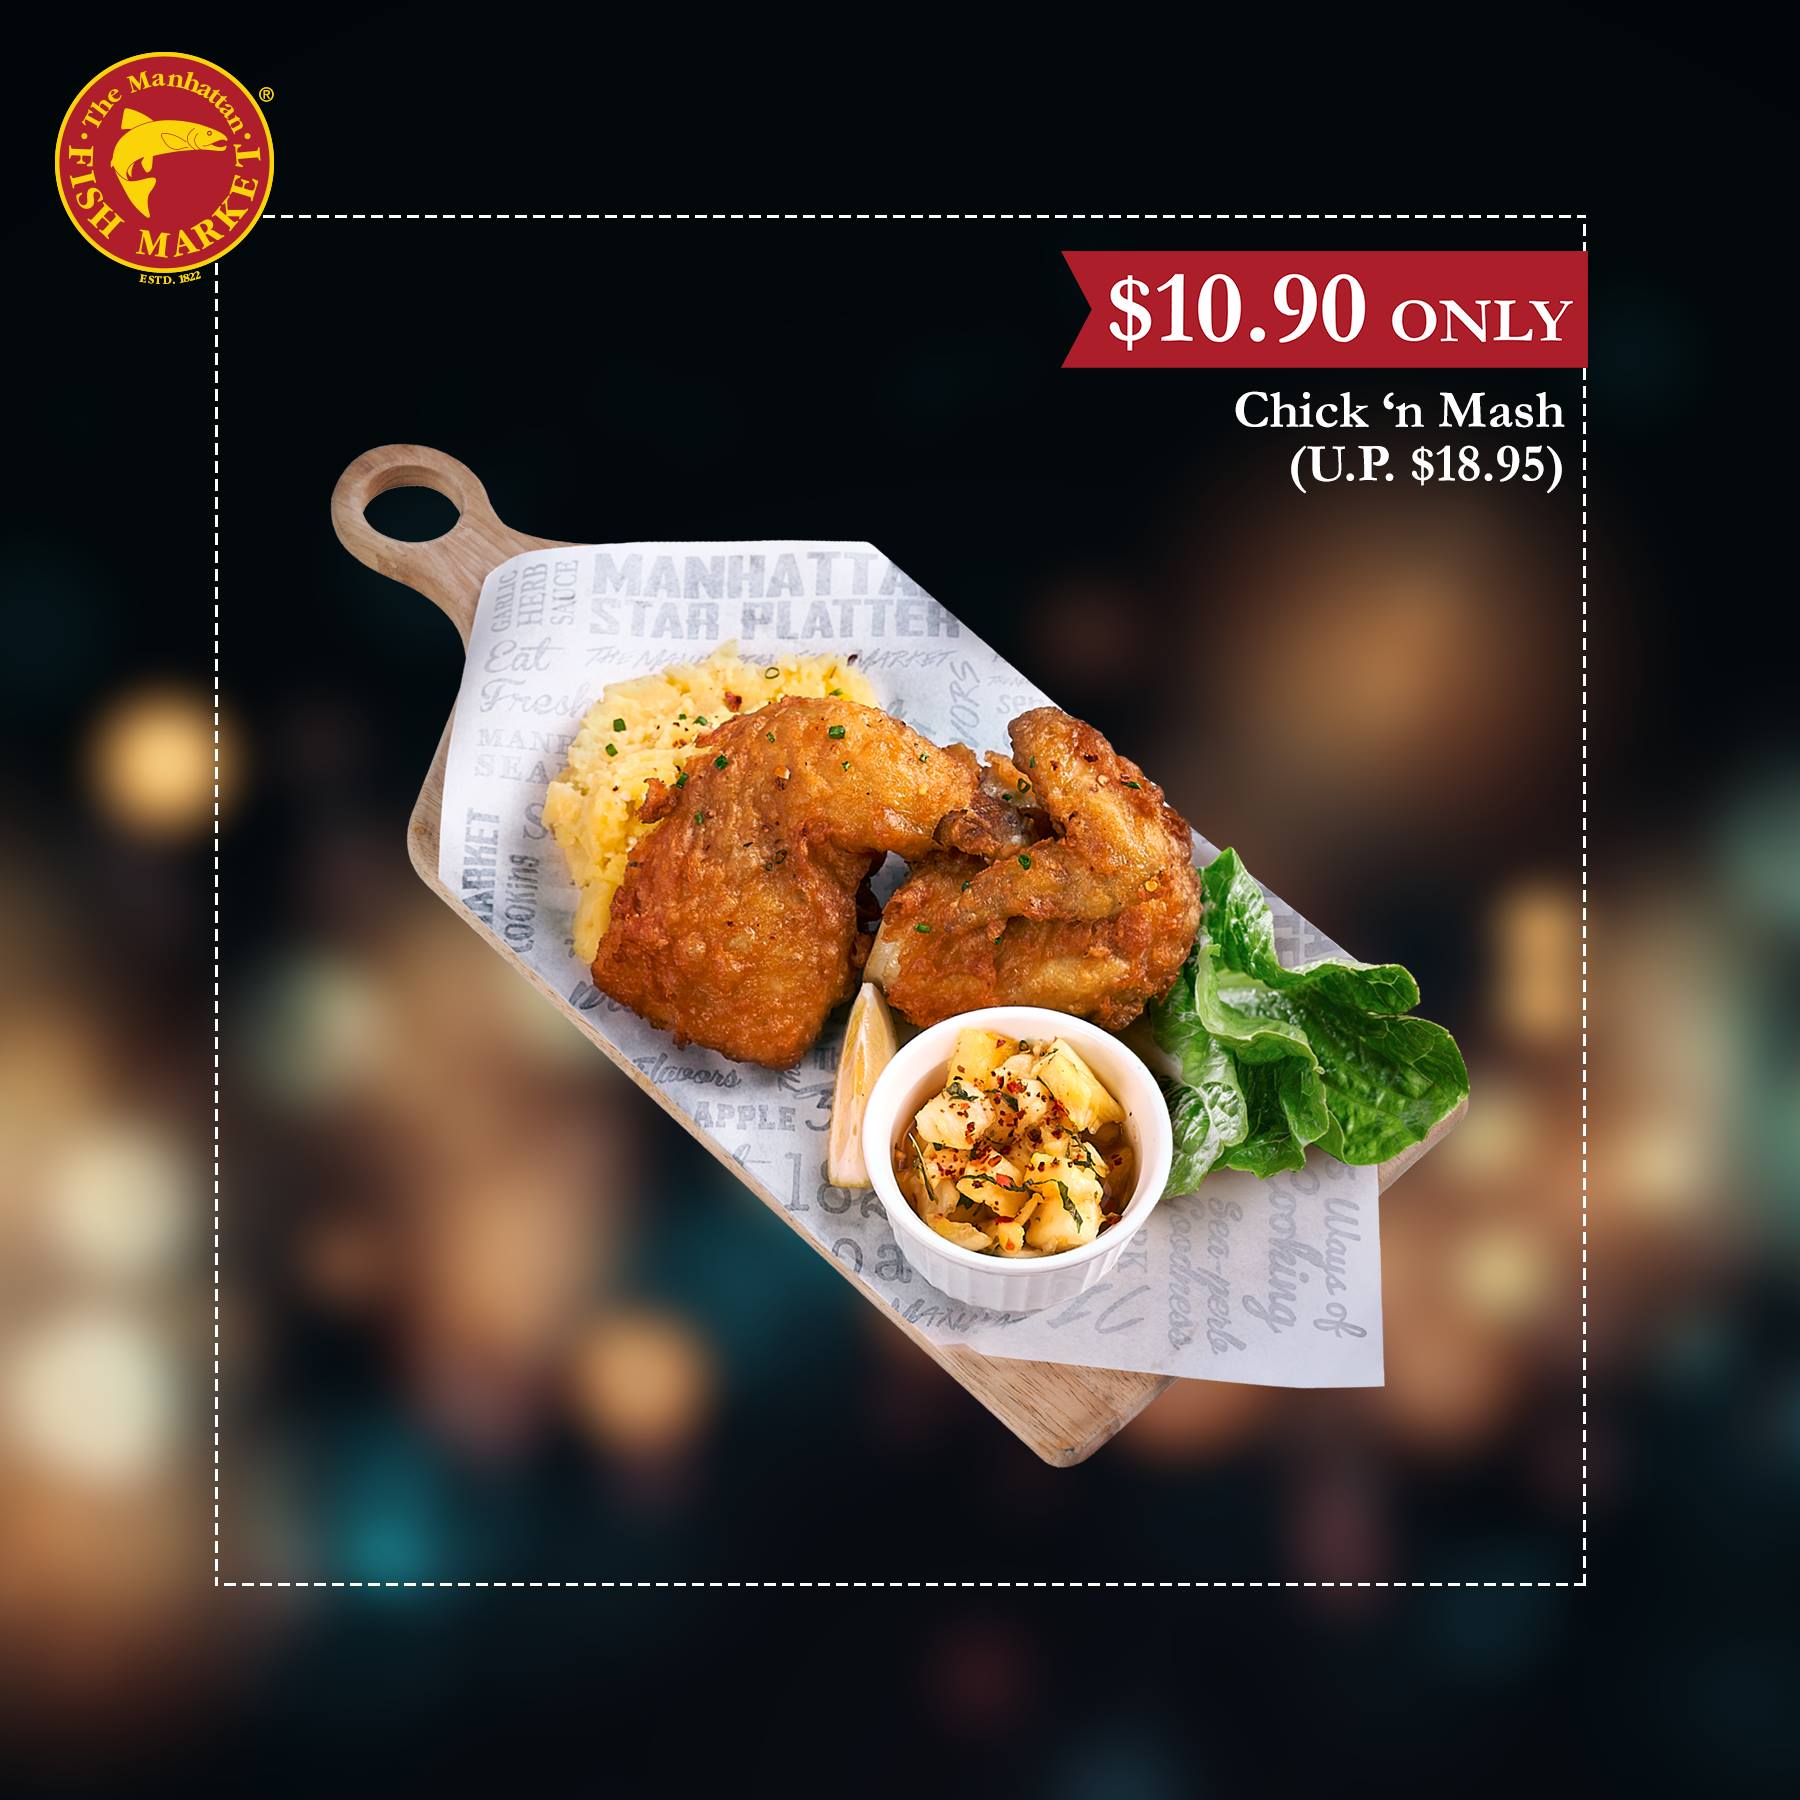 Flash these images to enjoy $9.90 & $10.90 deals at The Manhattan FISH MARKET. Valid from 23 Nov – 20 Dec 18 - 3